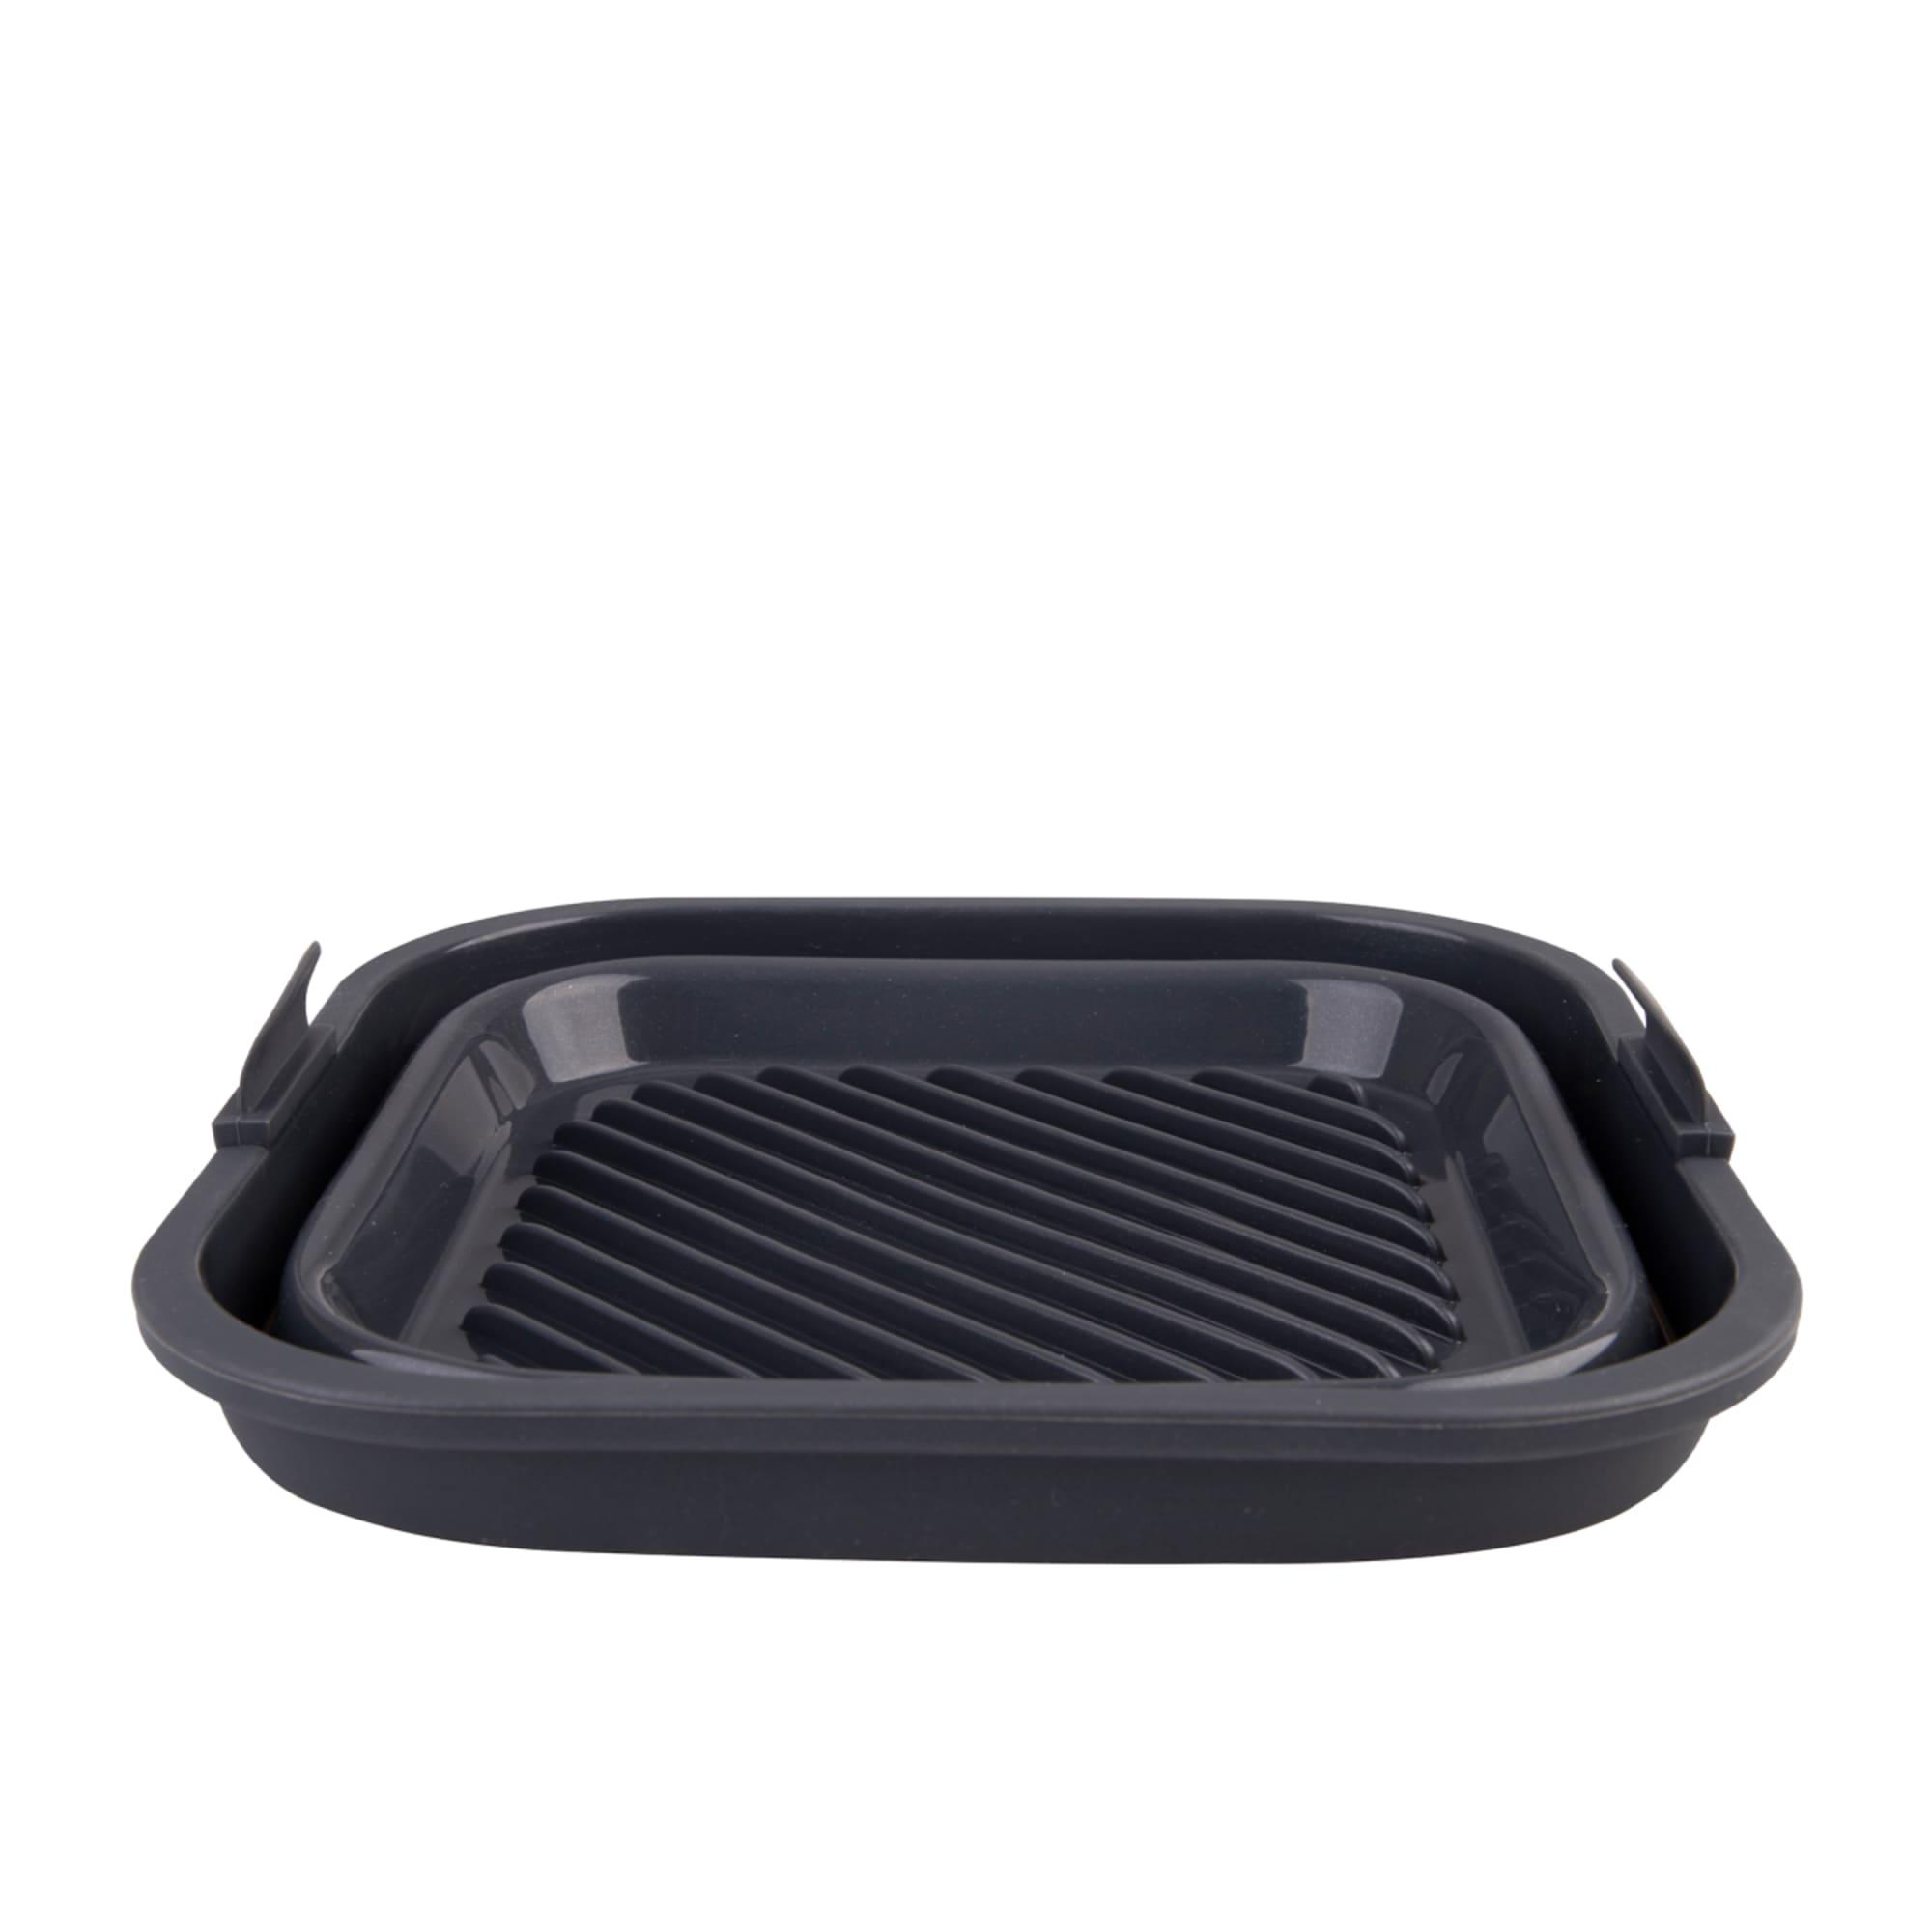 Daily Bake Silicone Square Collapsible Air Fryer Basket 22cm Image 4